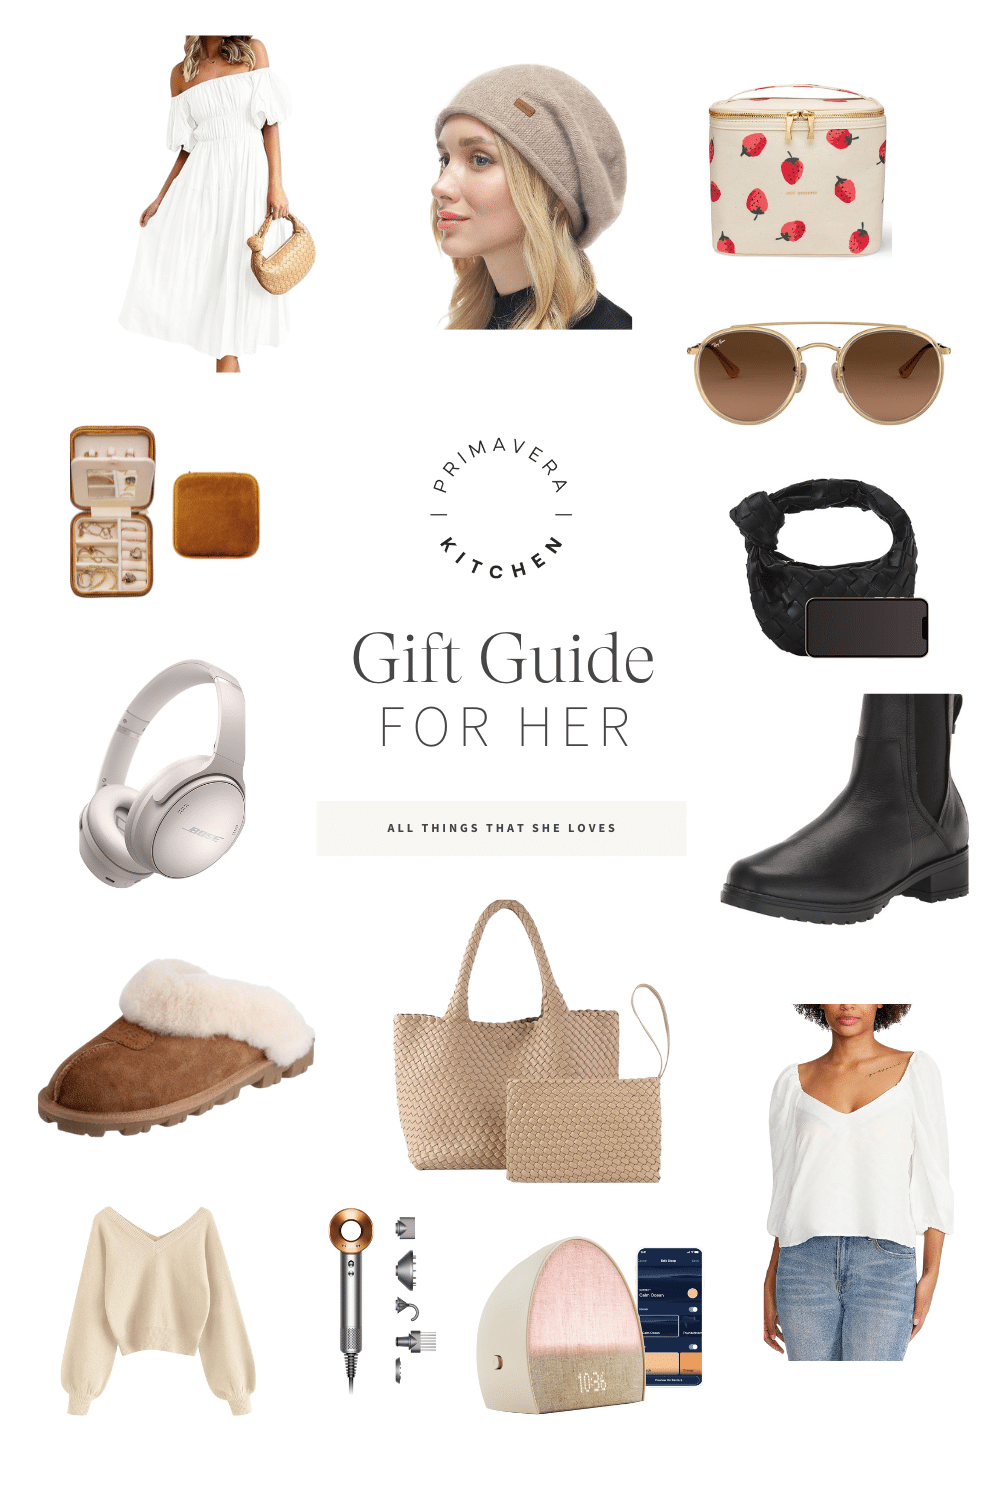 Titled Photo Collage (and shown): Gift Guide For Her